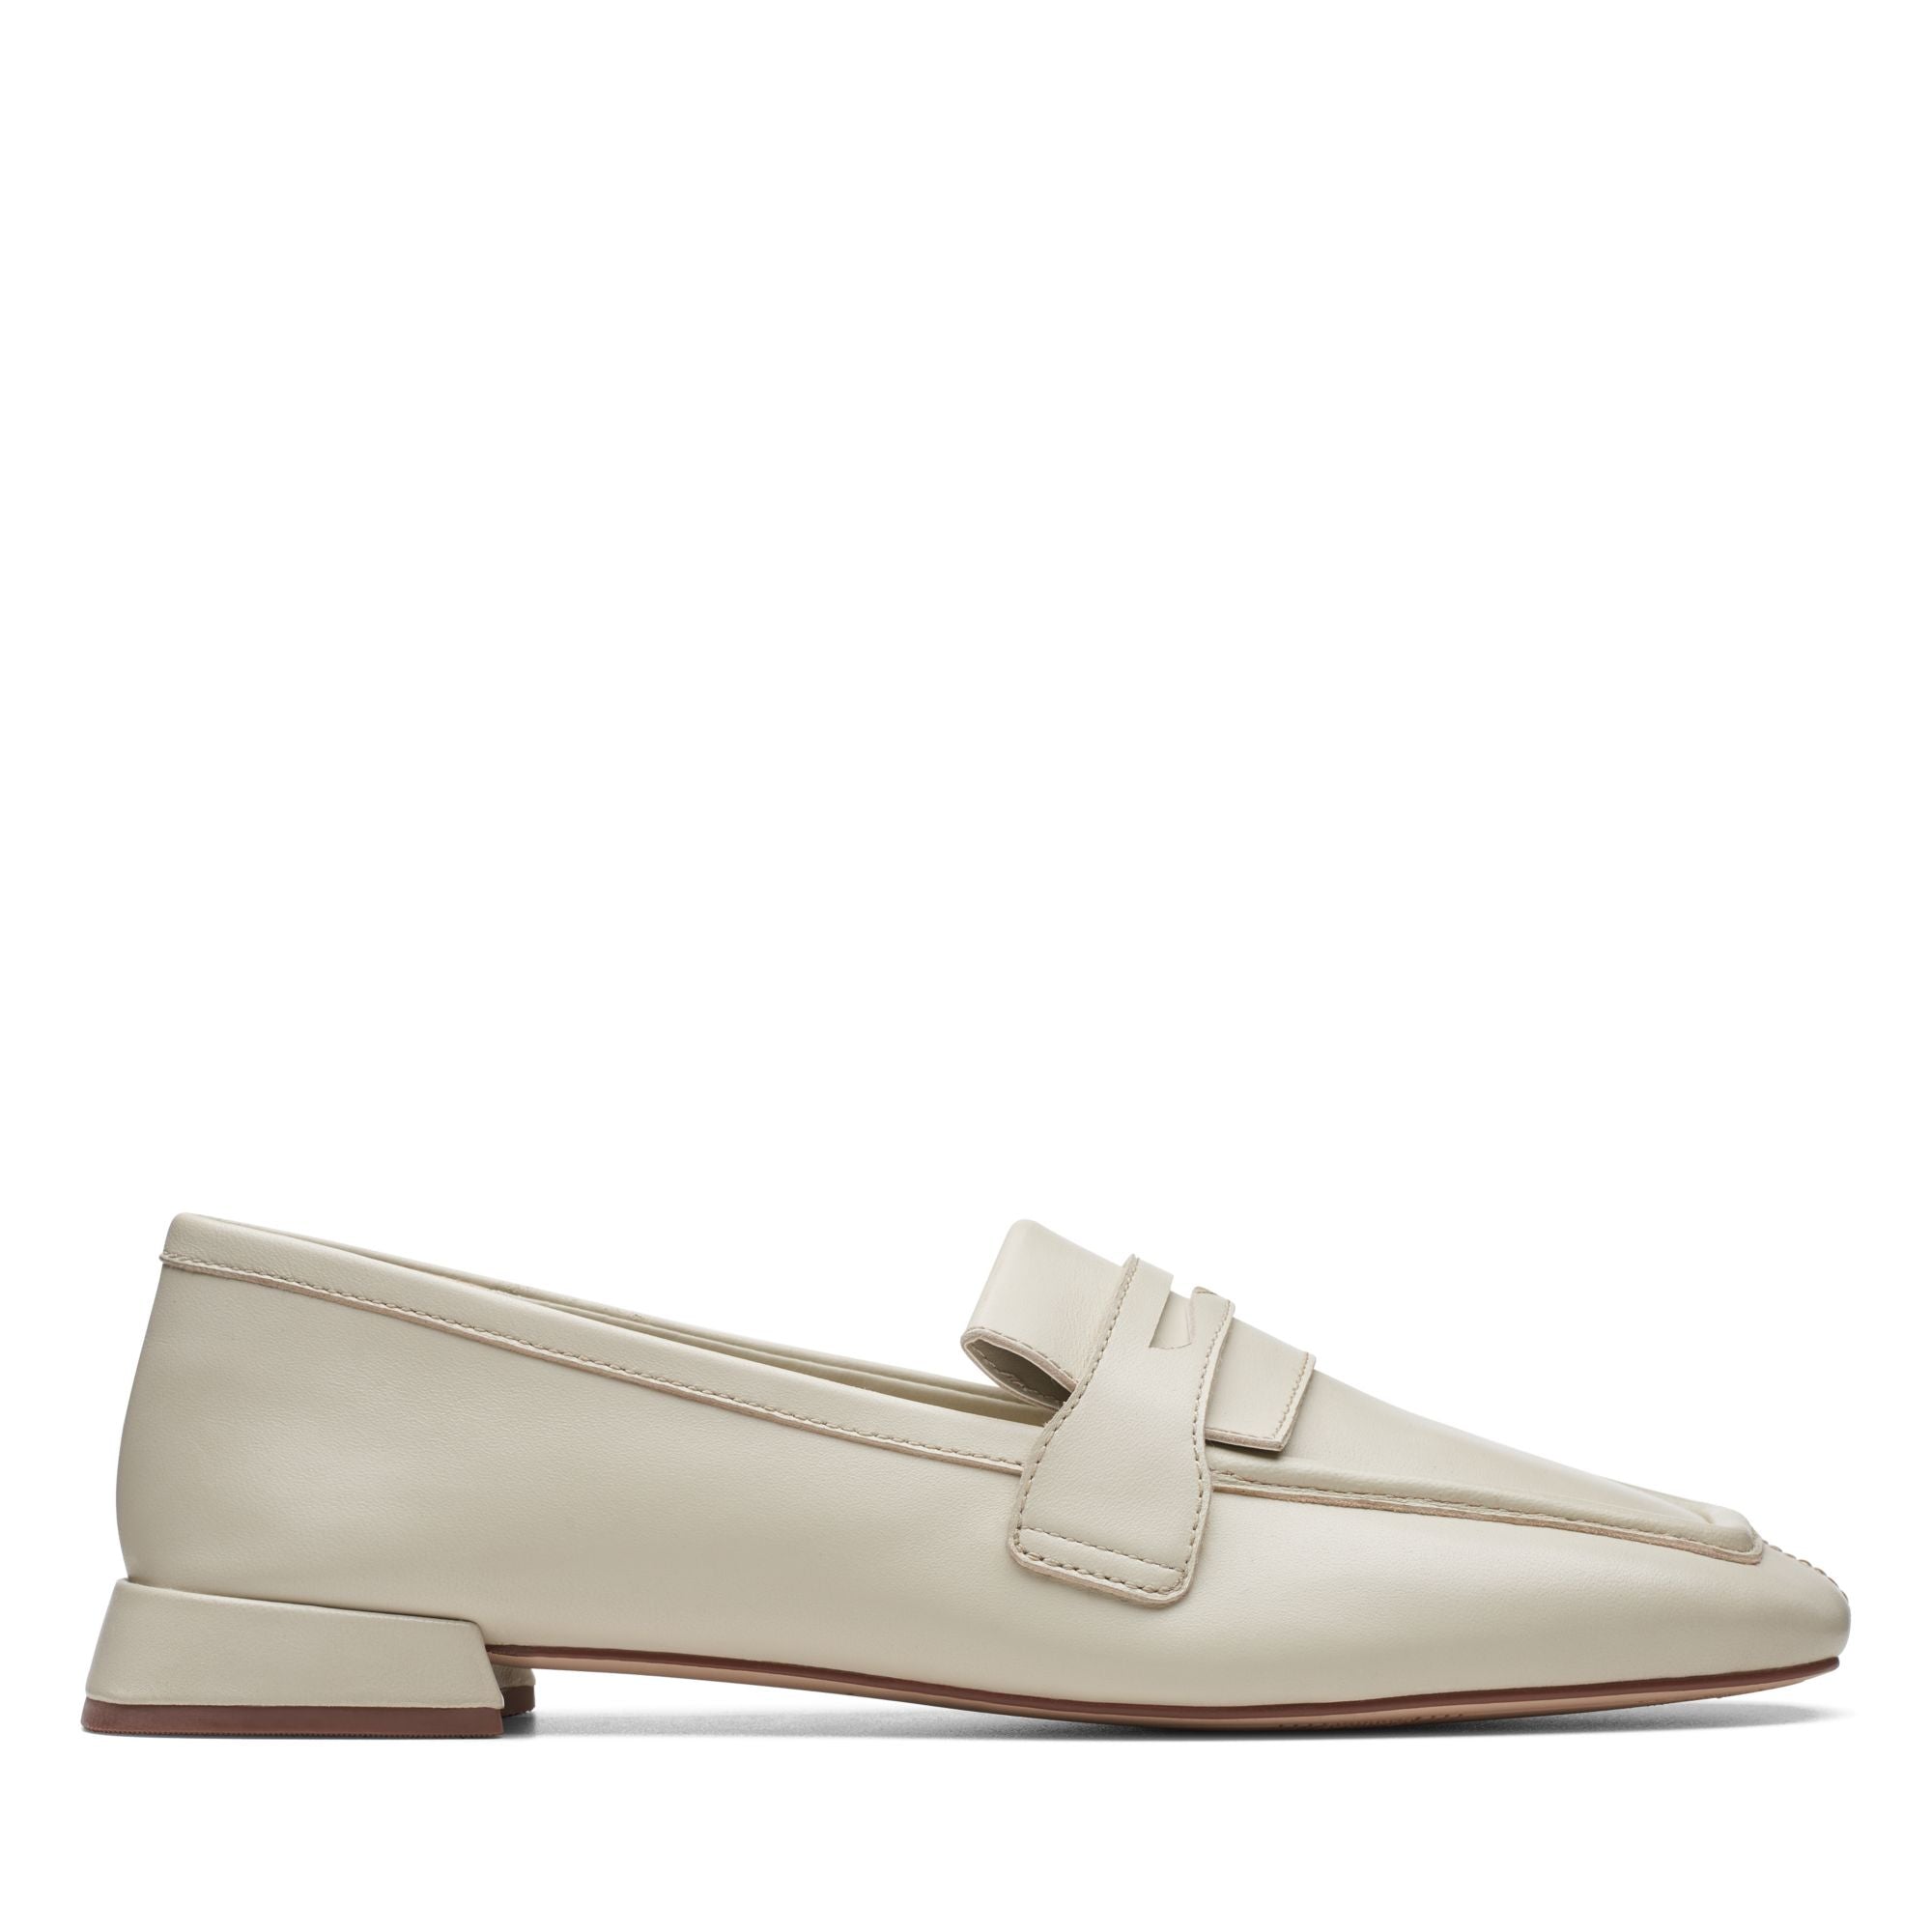 Ubree15 Surf Ivory Leather - Clarks Canada Official Site | Clarks Shoes